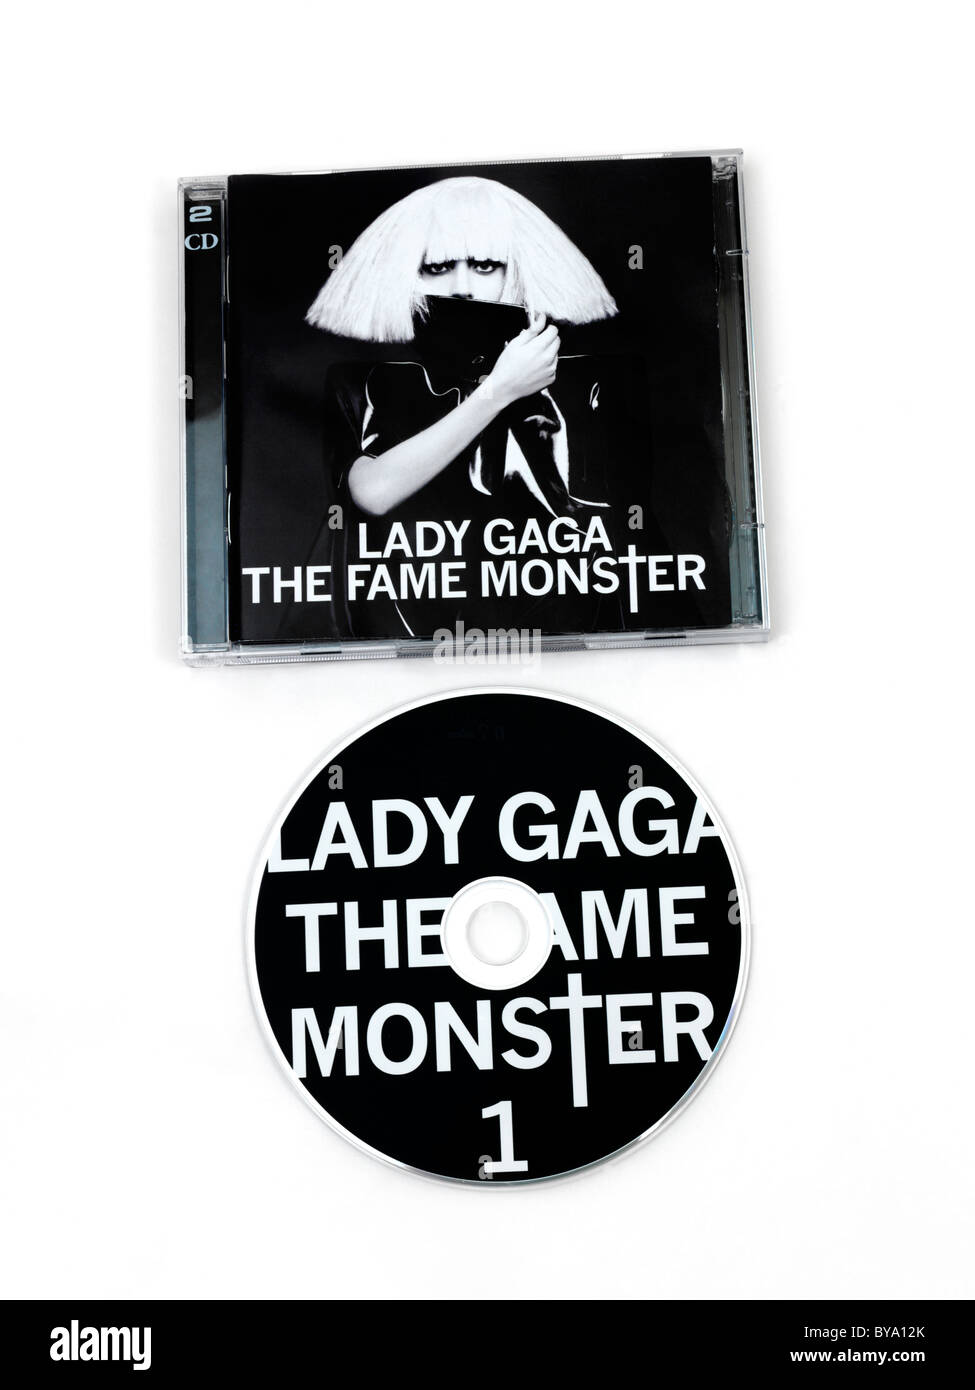 Lady Gaga The Fame Monster Compact Disc Stock Photo